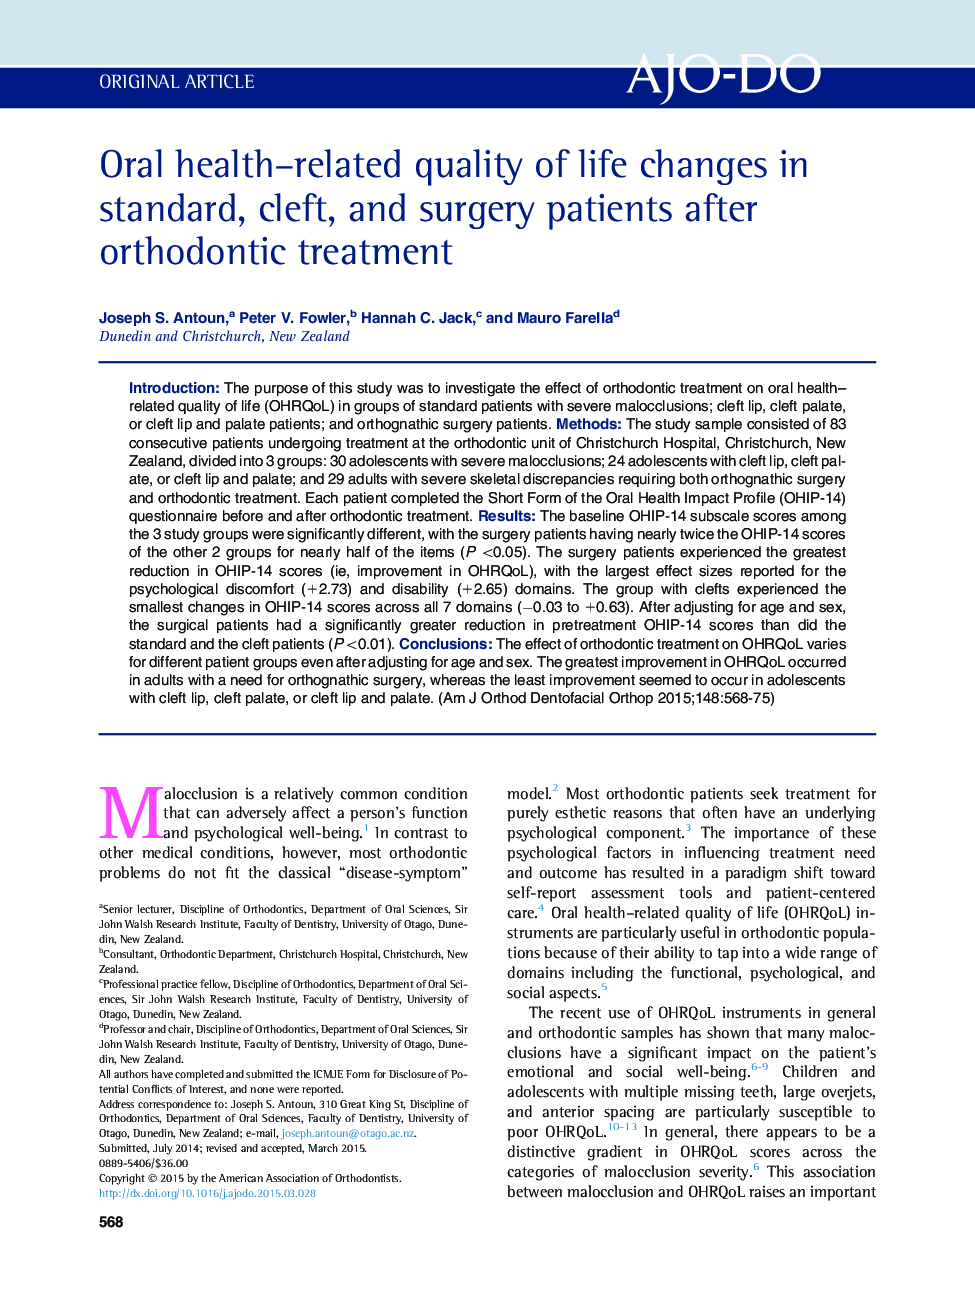 Oral health–related quality of life changes in standard, cleft, and surgery patients after orthodontic treatment 